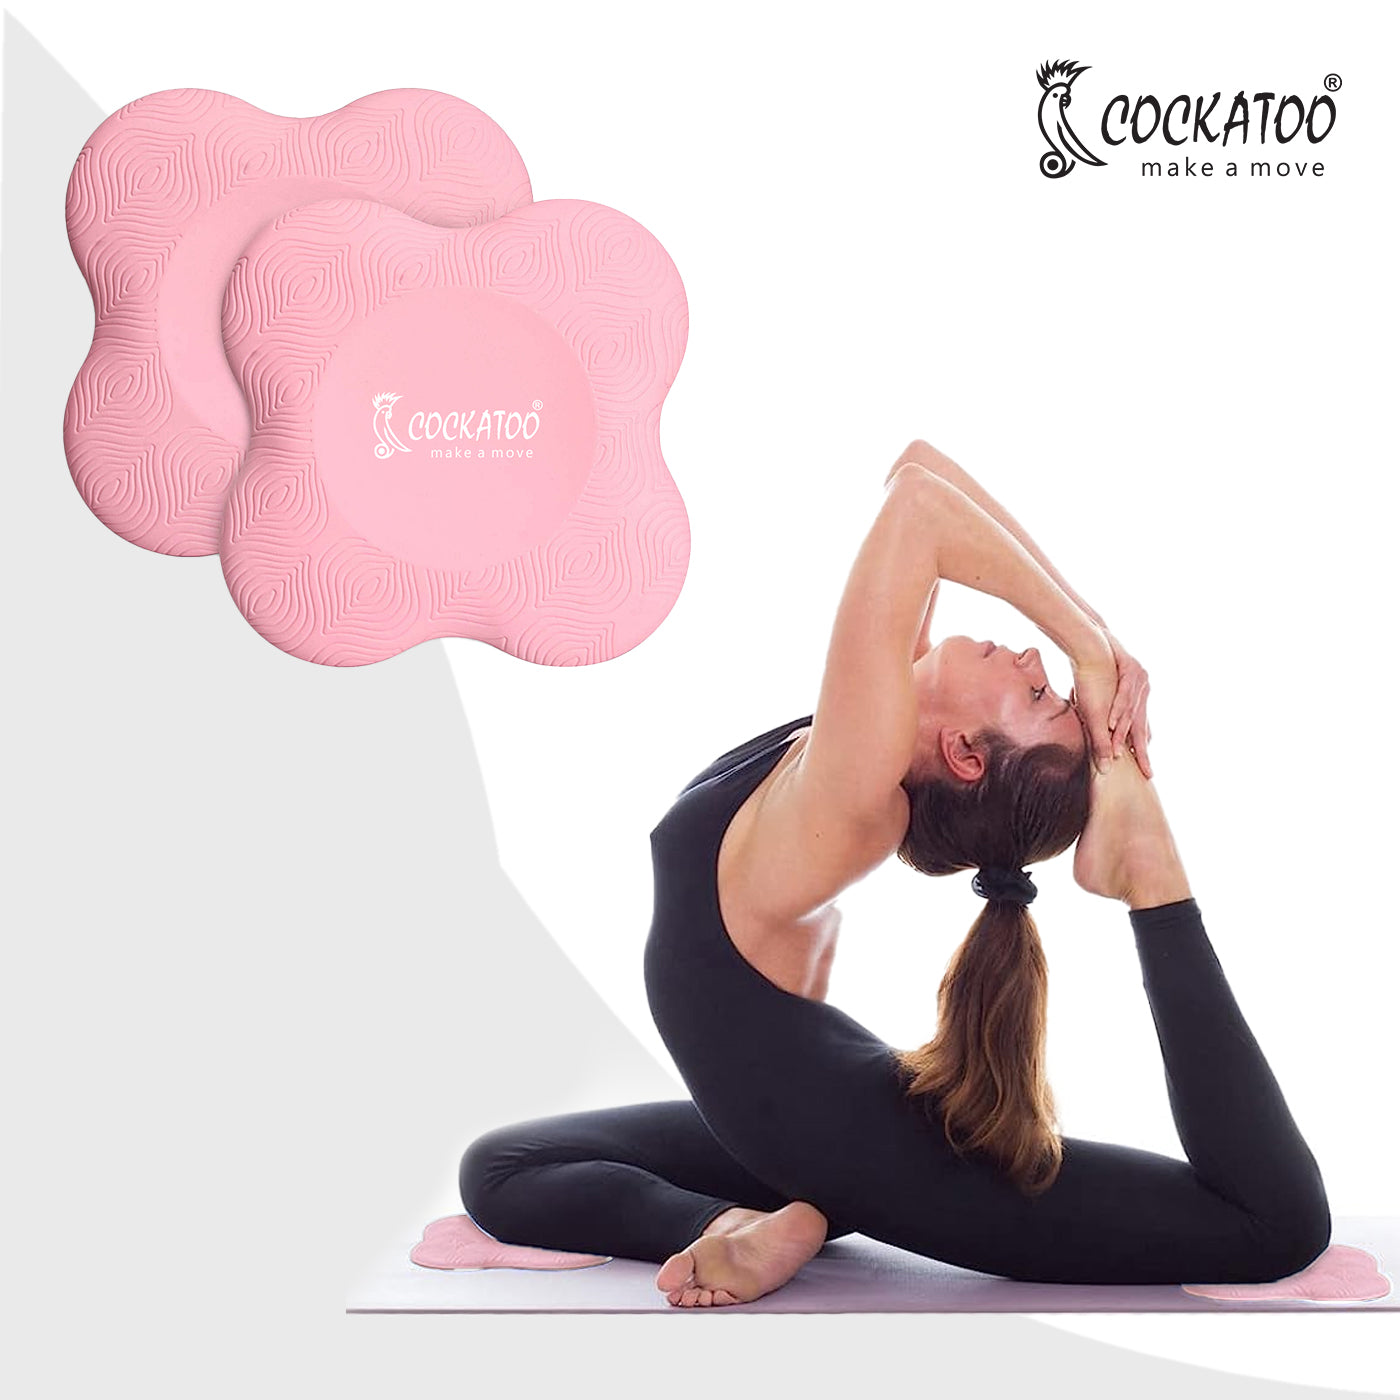 Cockatoo Non-Slip Yoga Pad, 20 MM Padding for Joint Protection and Sta